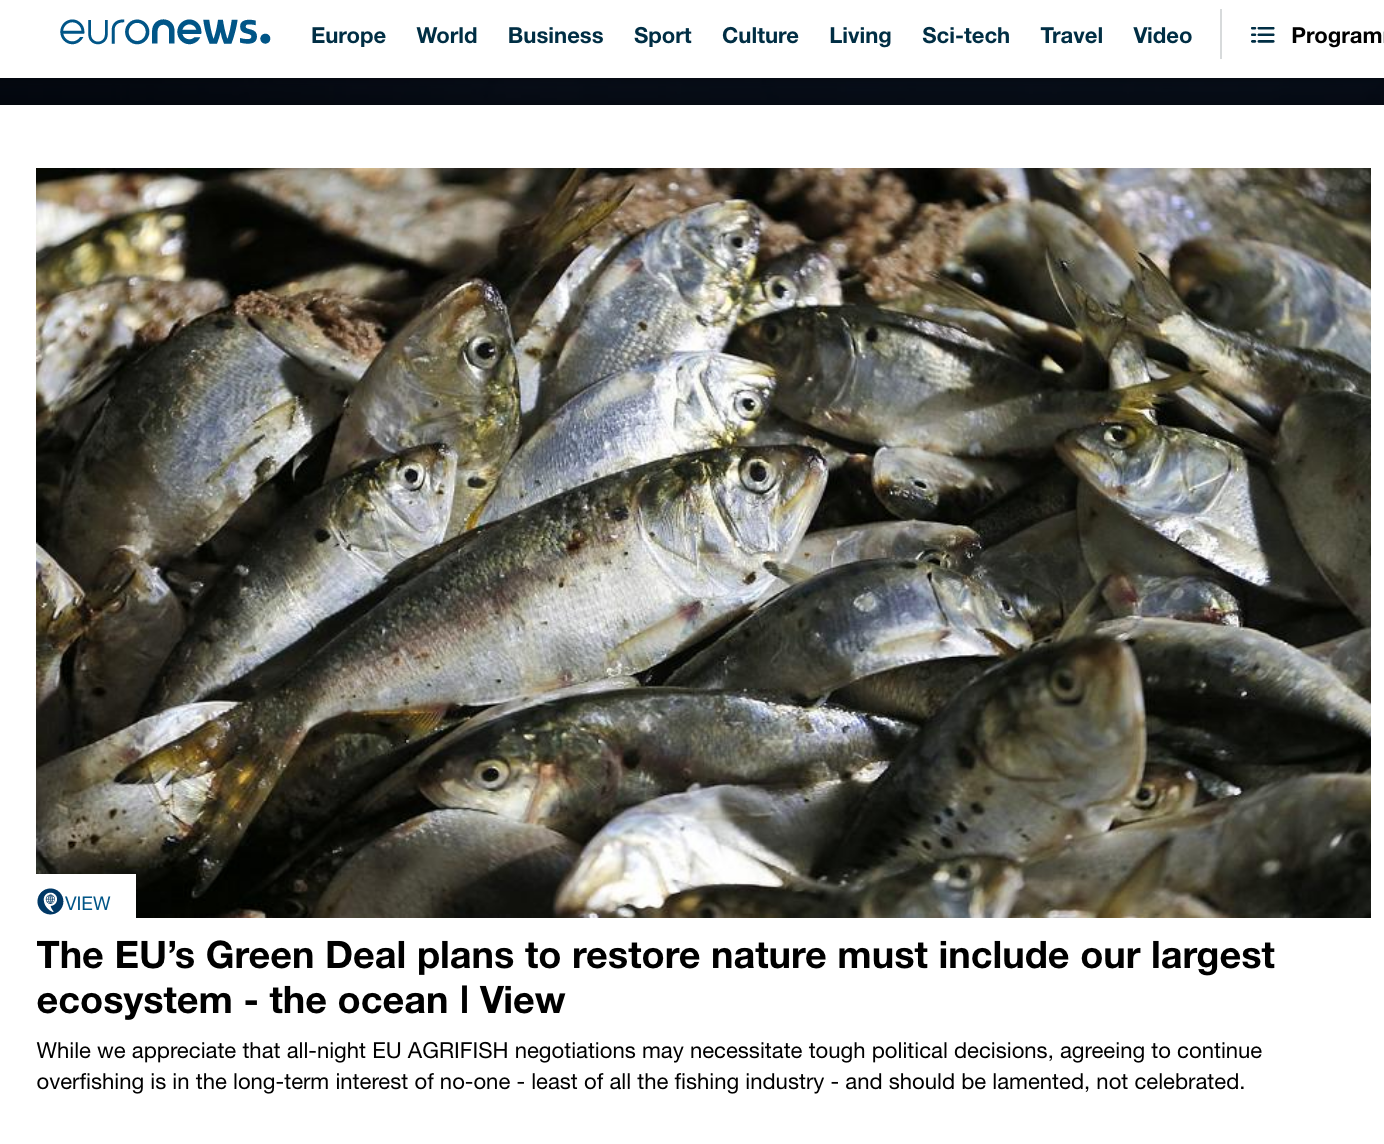 The EU’s Green Deal plans to restore nature must include our largest ecosystem - the ocean ǀ View